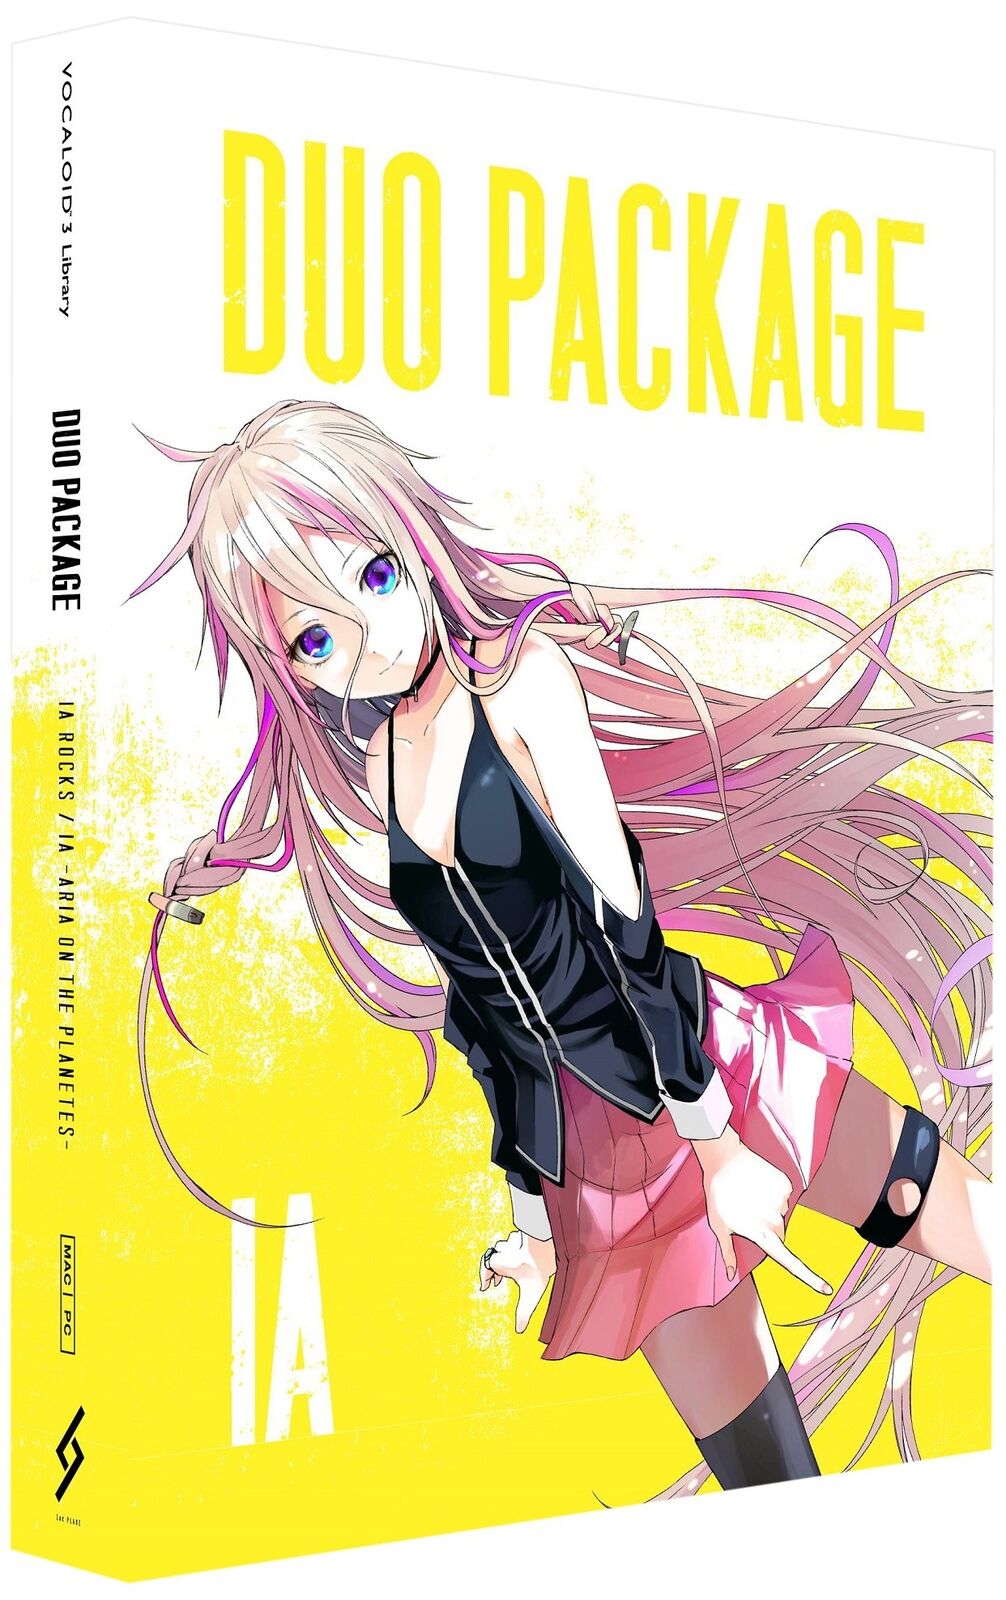 New IA DUO PACKAGE Windows PC Software VOCALOID 3 Library JAPANESE